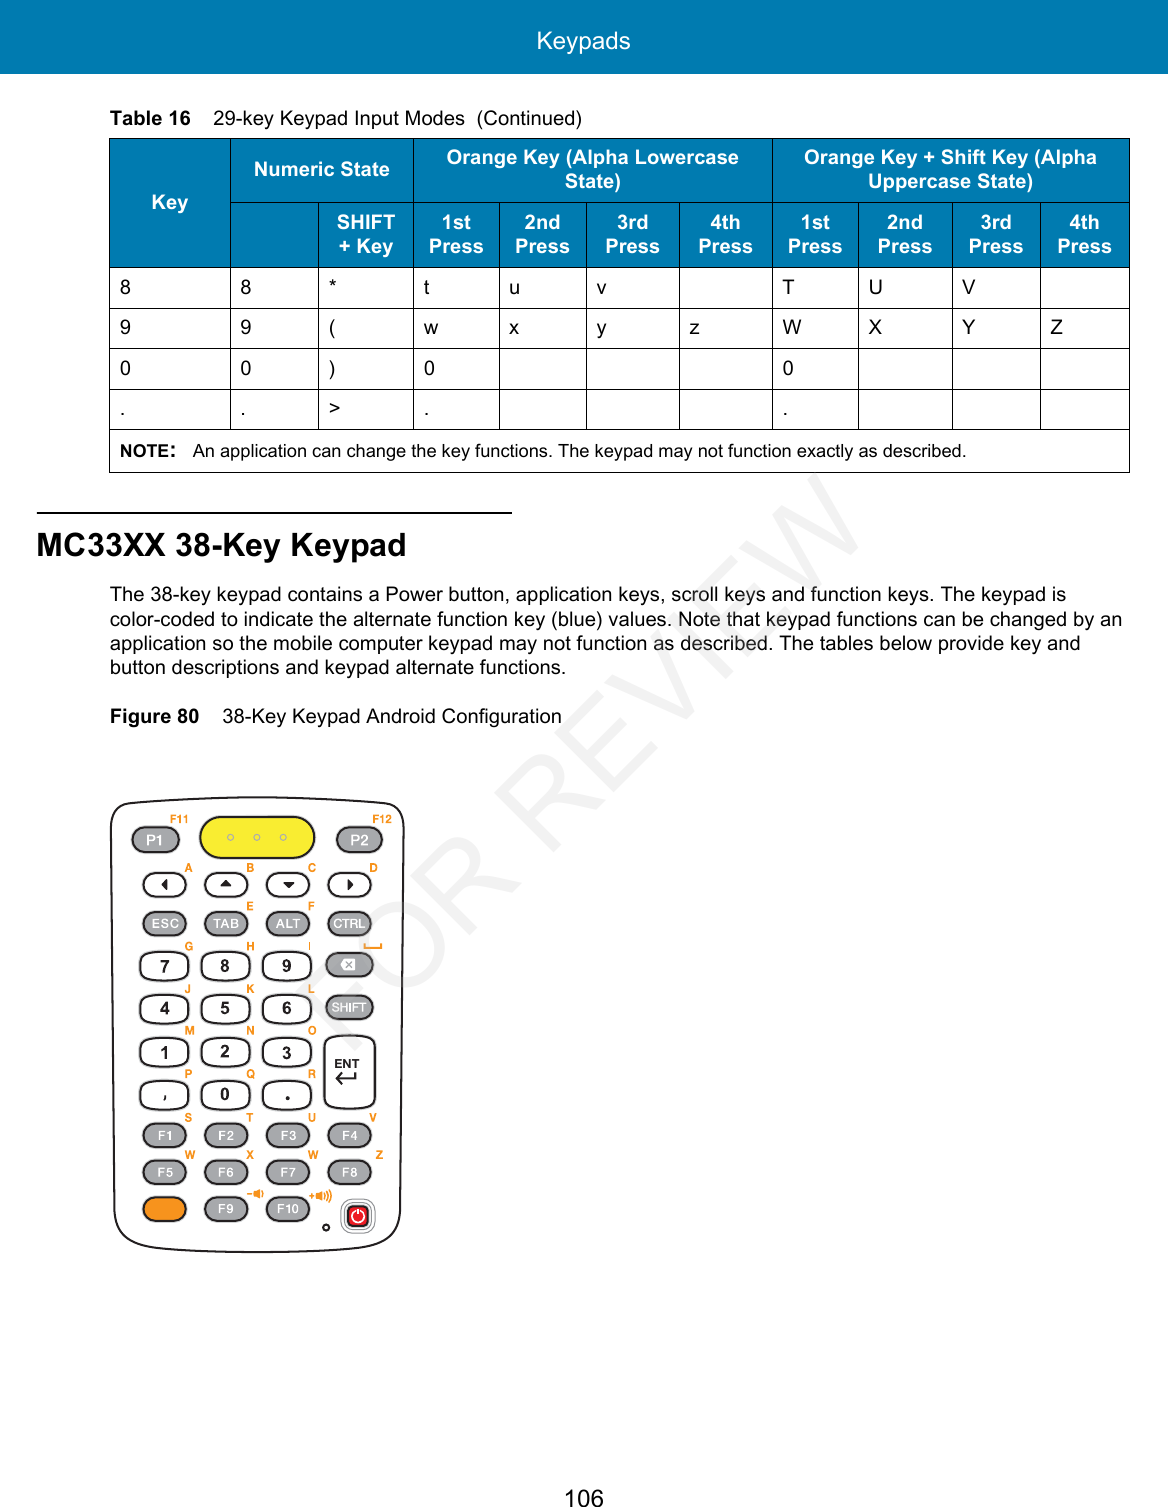 Keypads106MC33XX 38-Key KeypadThe 38-key keypad contains a Power button, application keys, scroll keys and function keys. The keypad is color-coded to indicate the alternate function key (blue) values. Note that keypad functions can be changed by an application so the mobile computer keypad may not function as described. The tables below provide key and button descriptions and keypad alternate functions.Figure 80    38-Key Keypad Android Configuration88*tuv TUV99(wxyzWXYZ00)0 0..&gt;. .NOTE:An application can change the key functions. The keypad may not function exactly as described.Table 16    29-key Keypad Input Modes  (Continued)KeyNumeric State Orange Key (Alpha Lowercase State)Orange Key + Shift Key (Alpha Uppercase State)SHIFT + Key1st Press2nd Press3rd Press4th Press1st Press2nd Press3rd Press4th PressENTFOR REVIEW